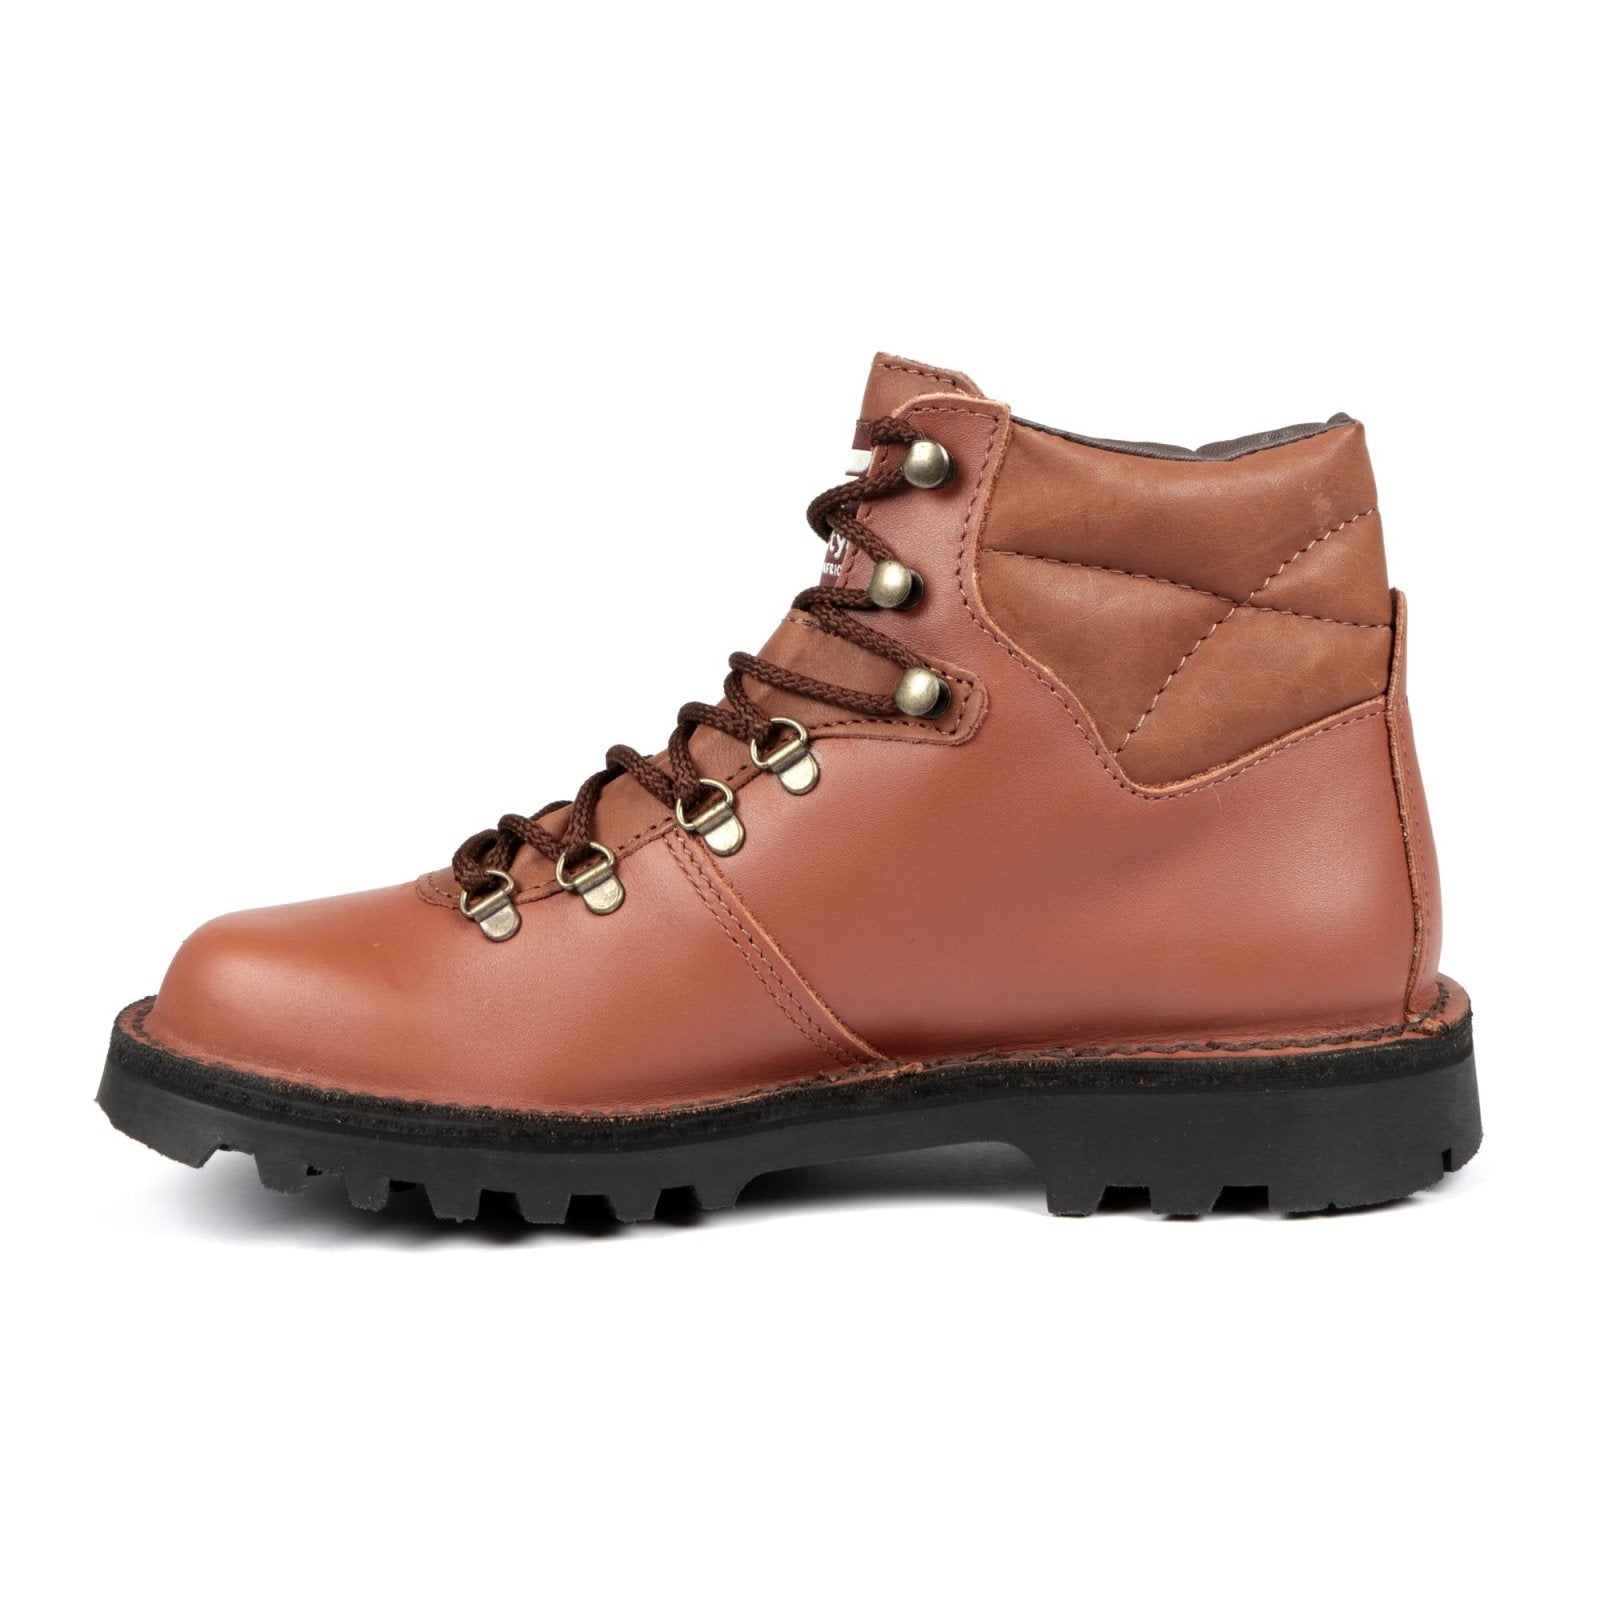 Seamus DKW Men's Premium Leather Boot w/ Cleated sole - Freestyle SA Proudly local leather boots veldskoens vellies leather shoes suede veldskoens